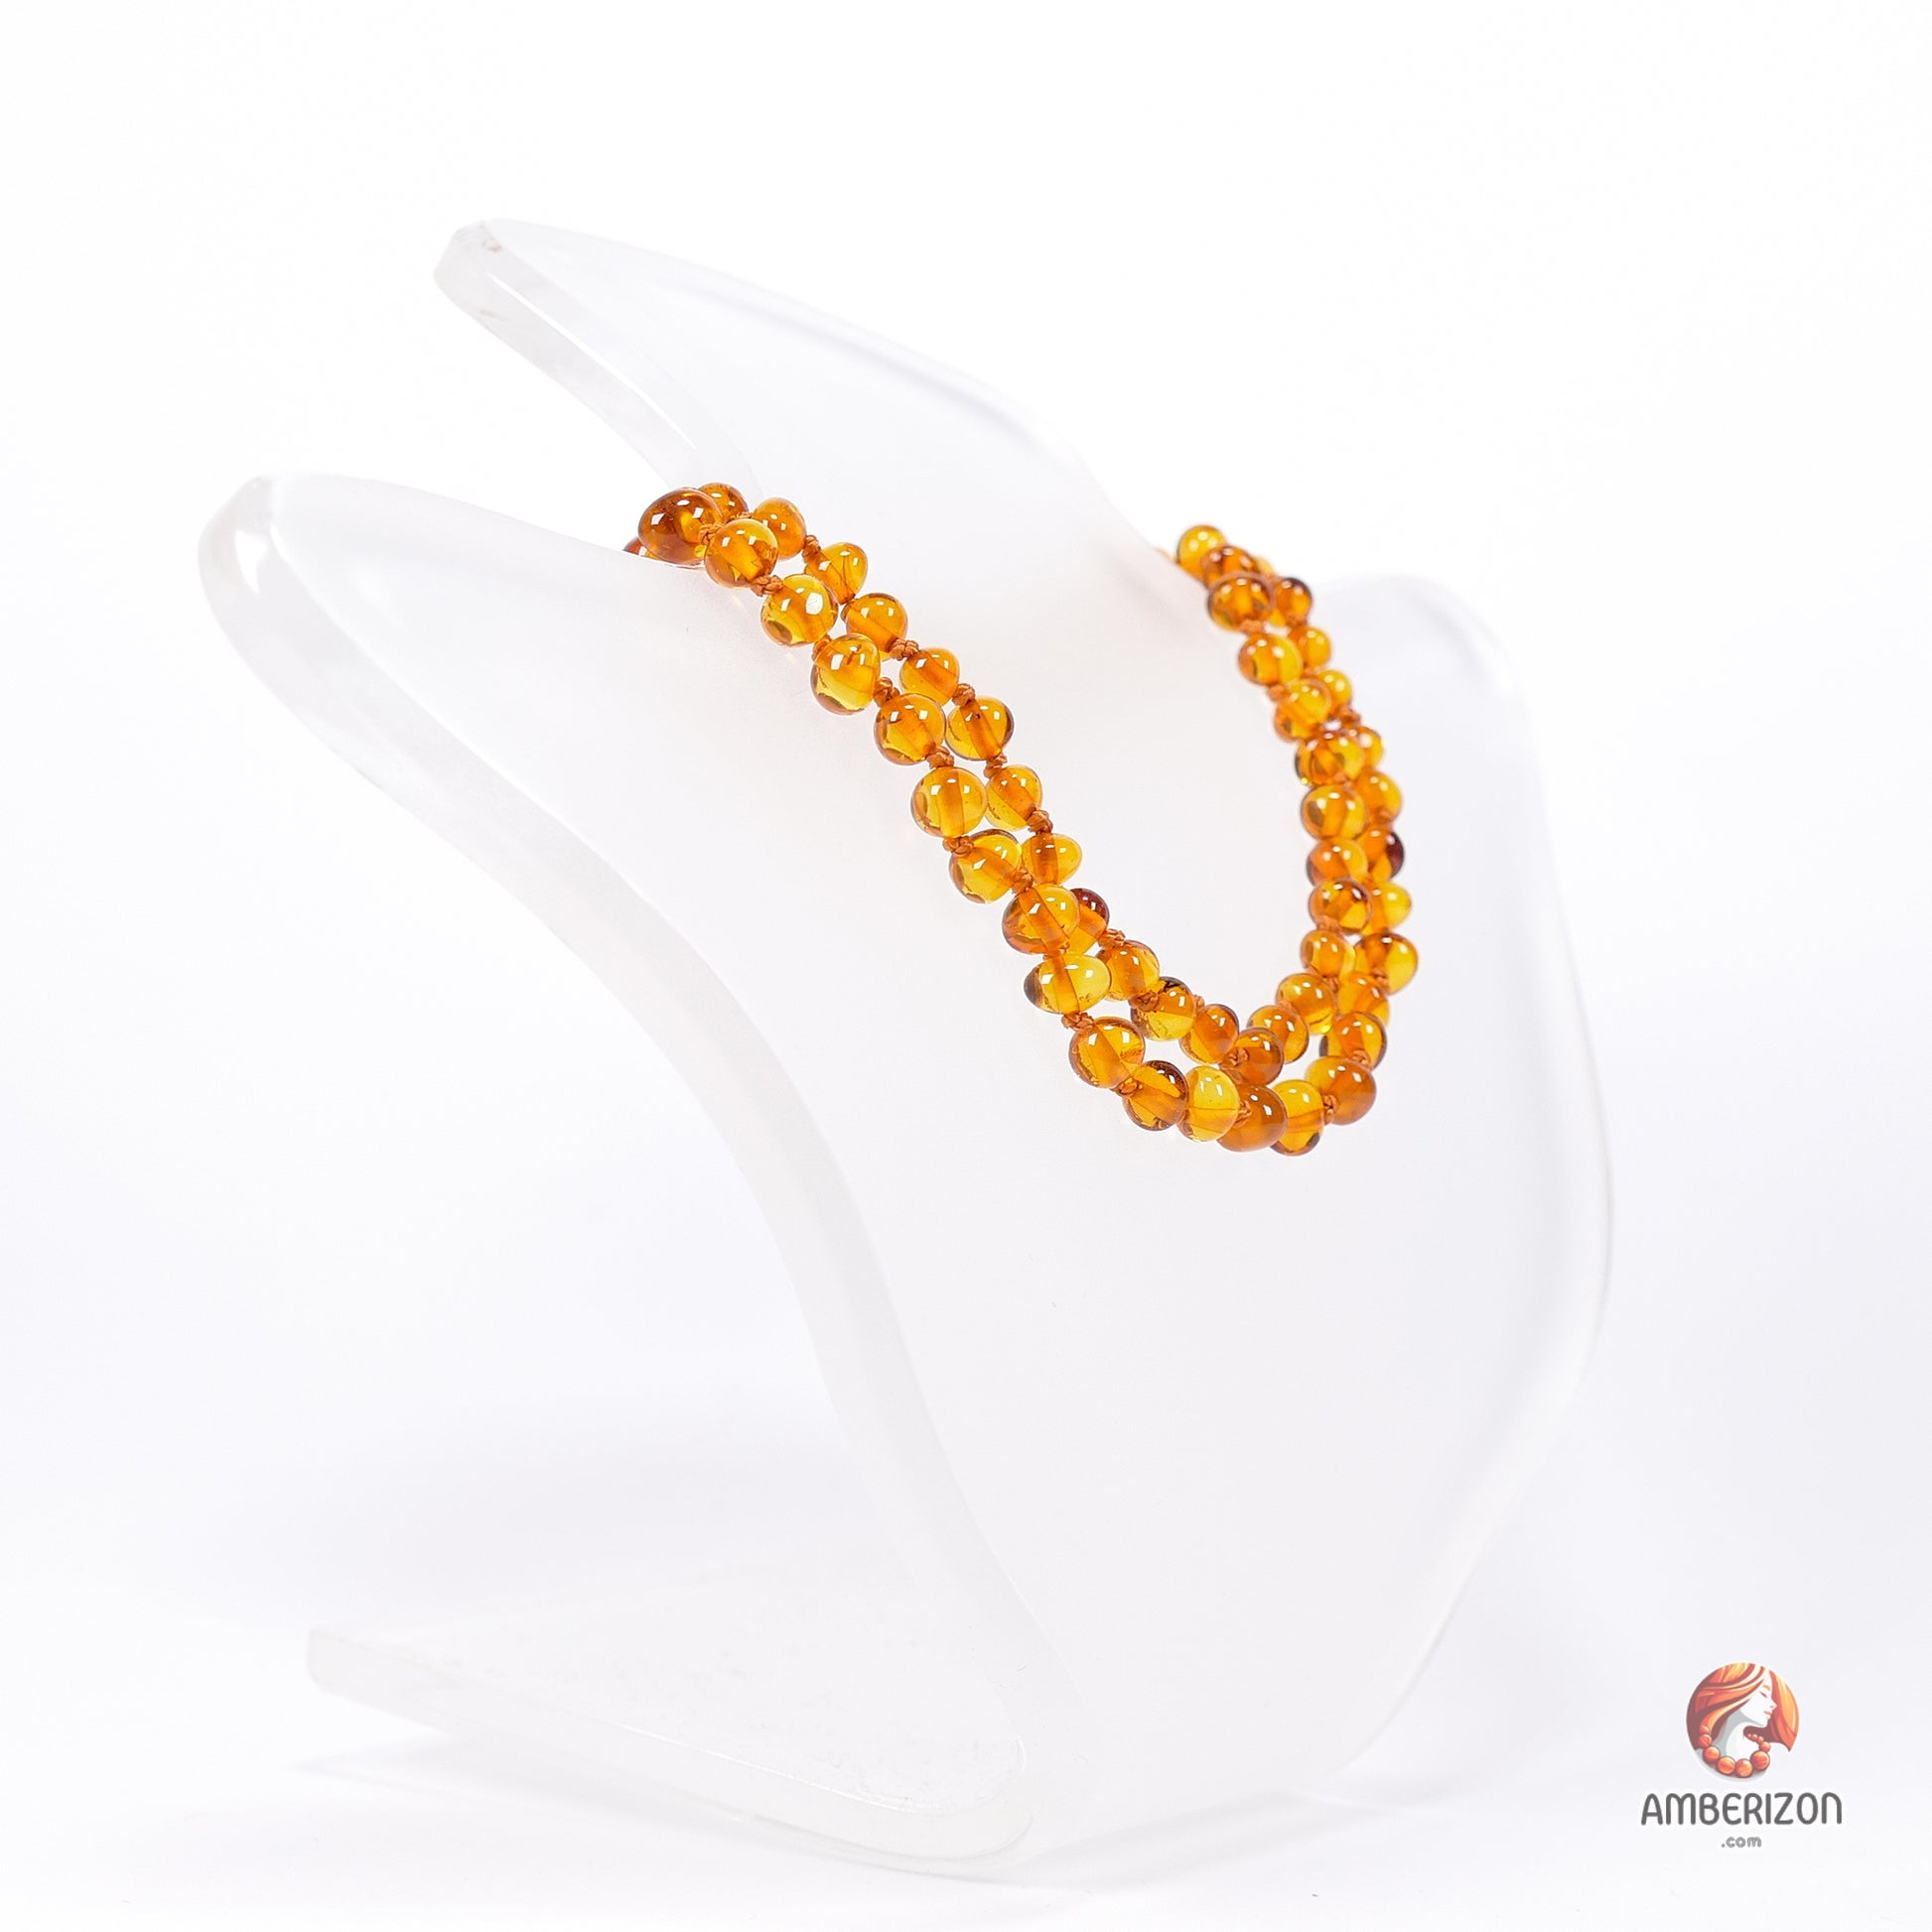 Premium minimalist women's necklace - Clear translucent polished amber beads - AAA beads